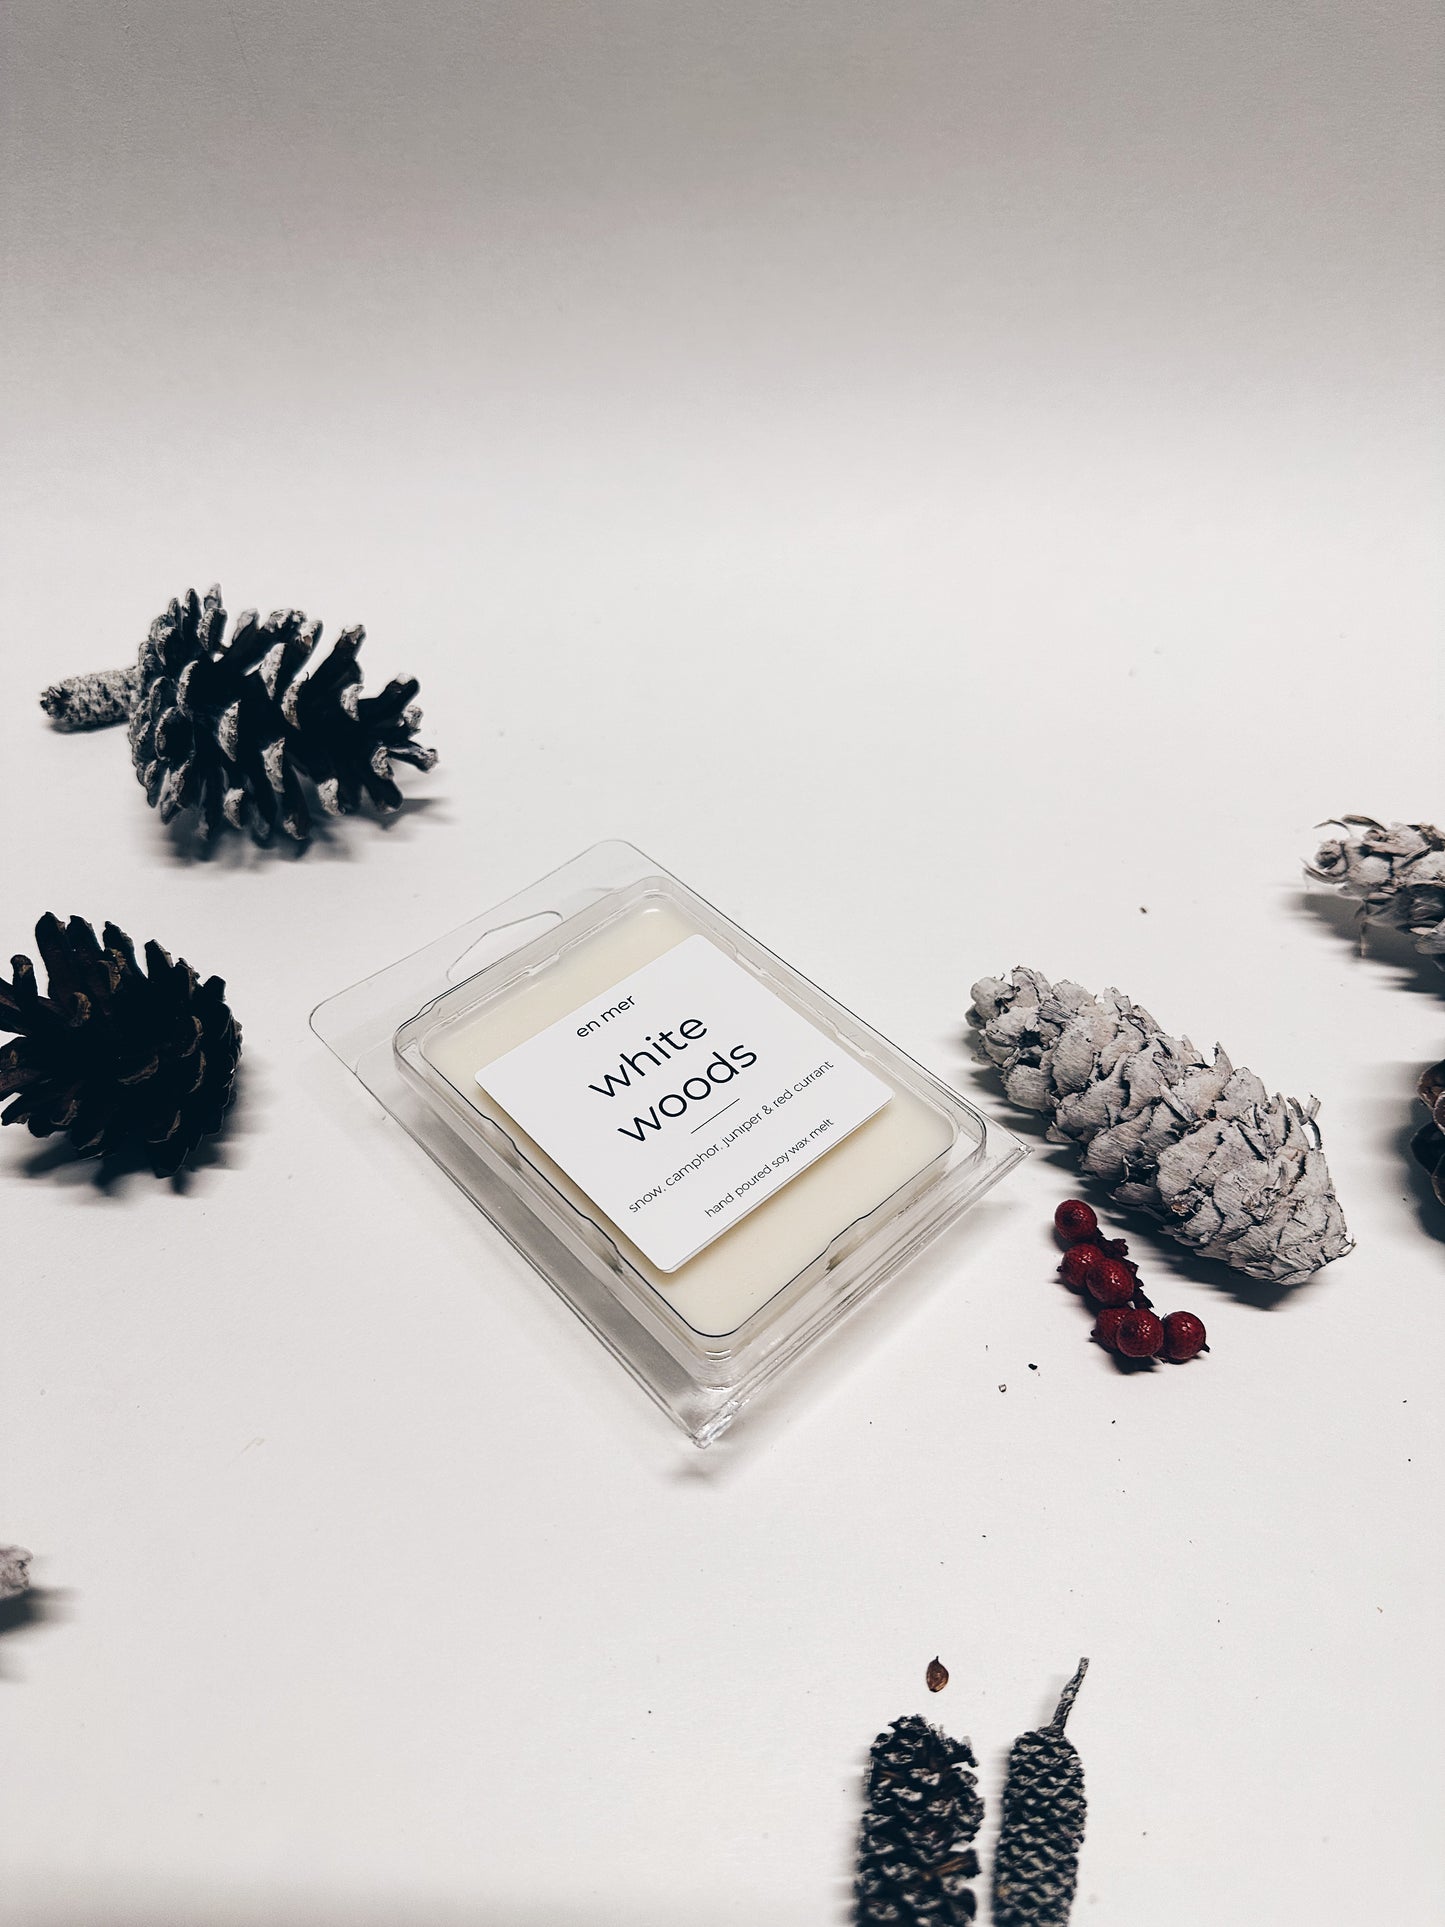 en mer | white woods | soy wax candle